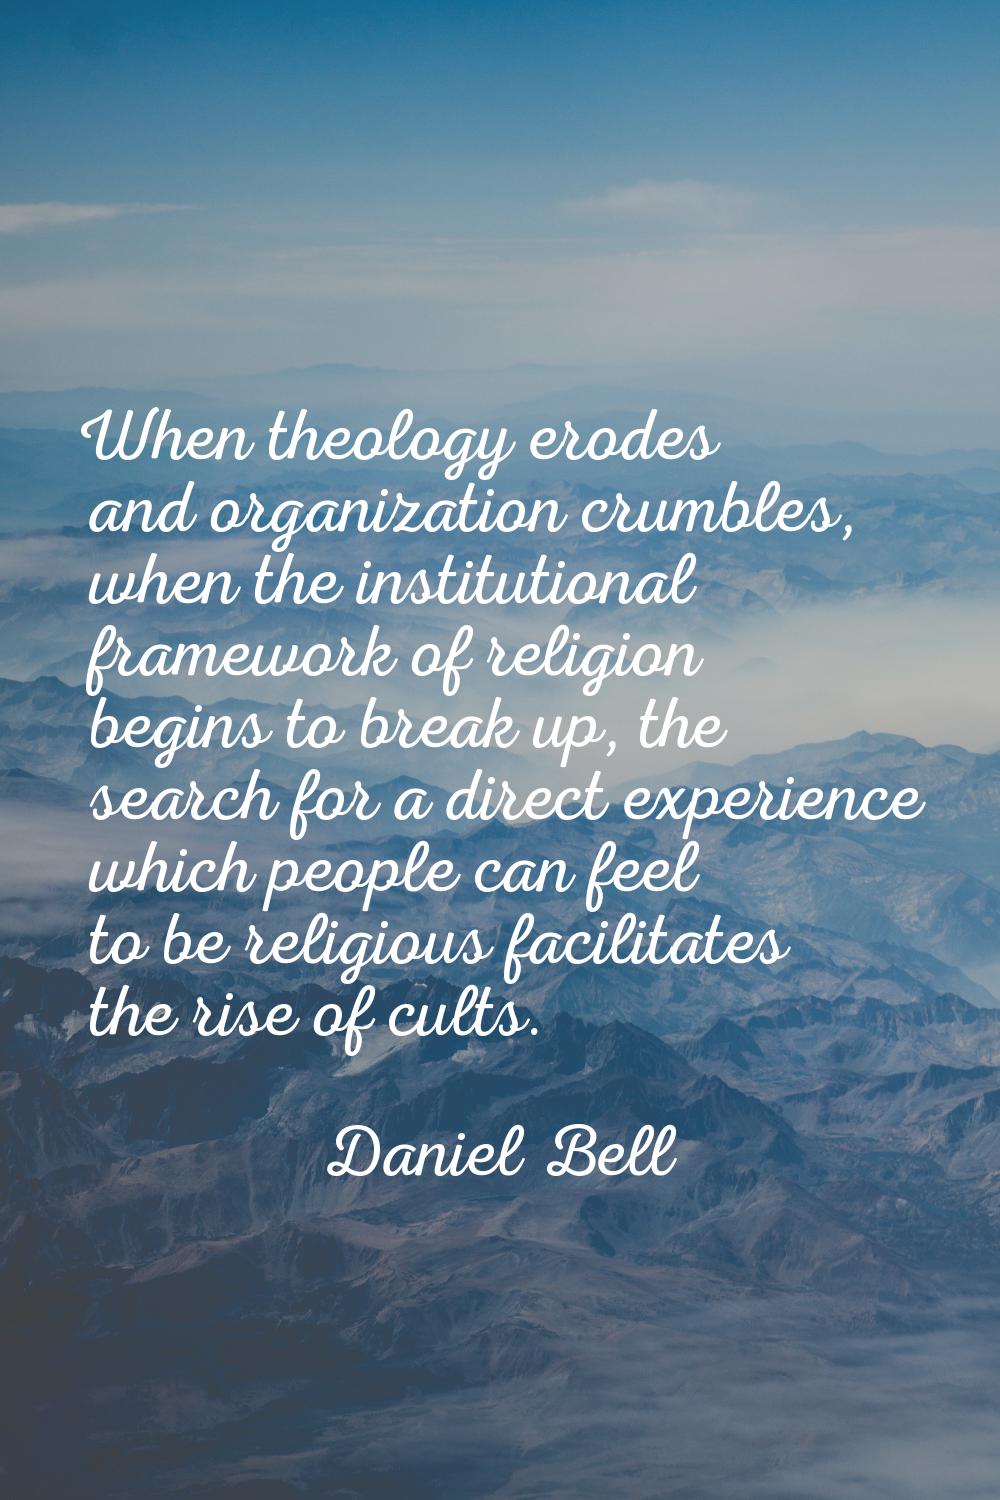 When theology erodes and organization crumbles, when the institutional framework of religion begins